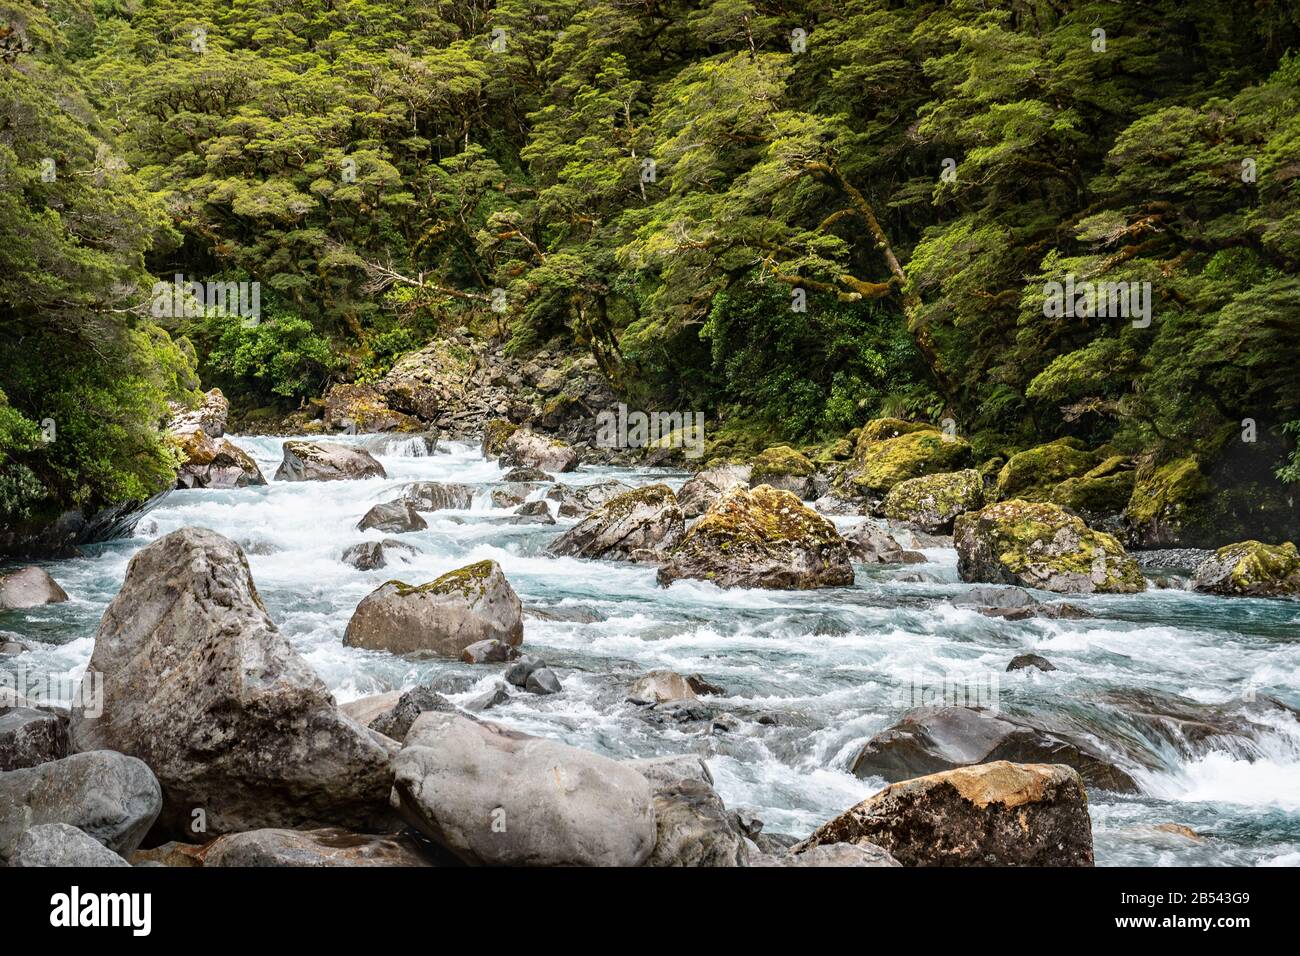 Wild river roaming over the rocks through a lush forest in Fjordland, New Zealand Stock Photo